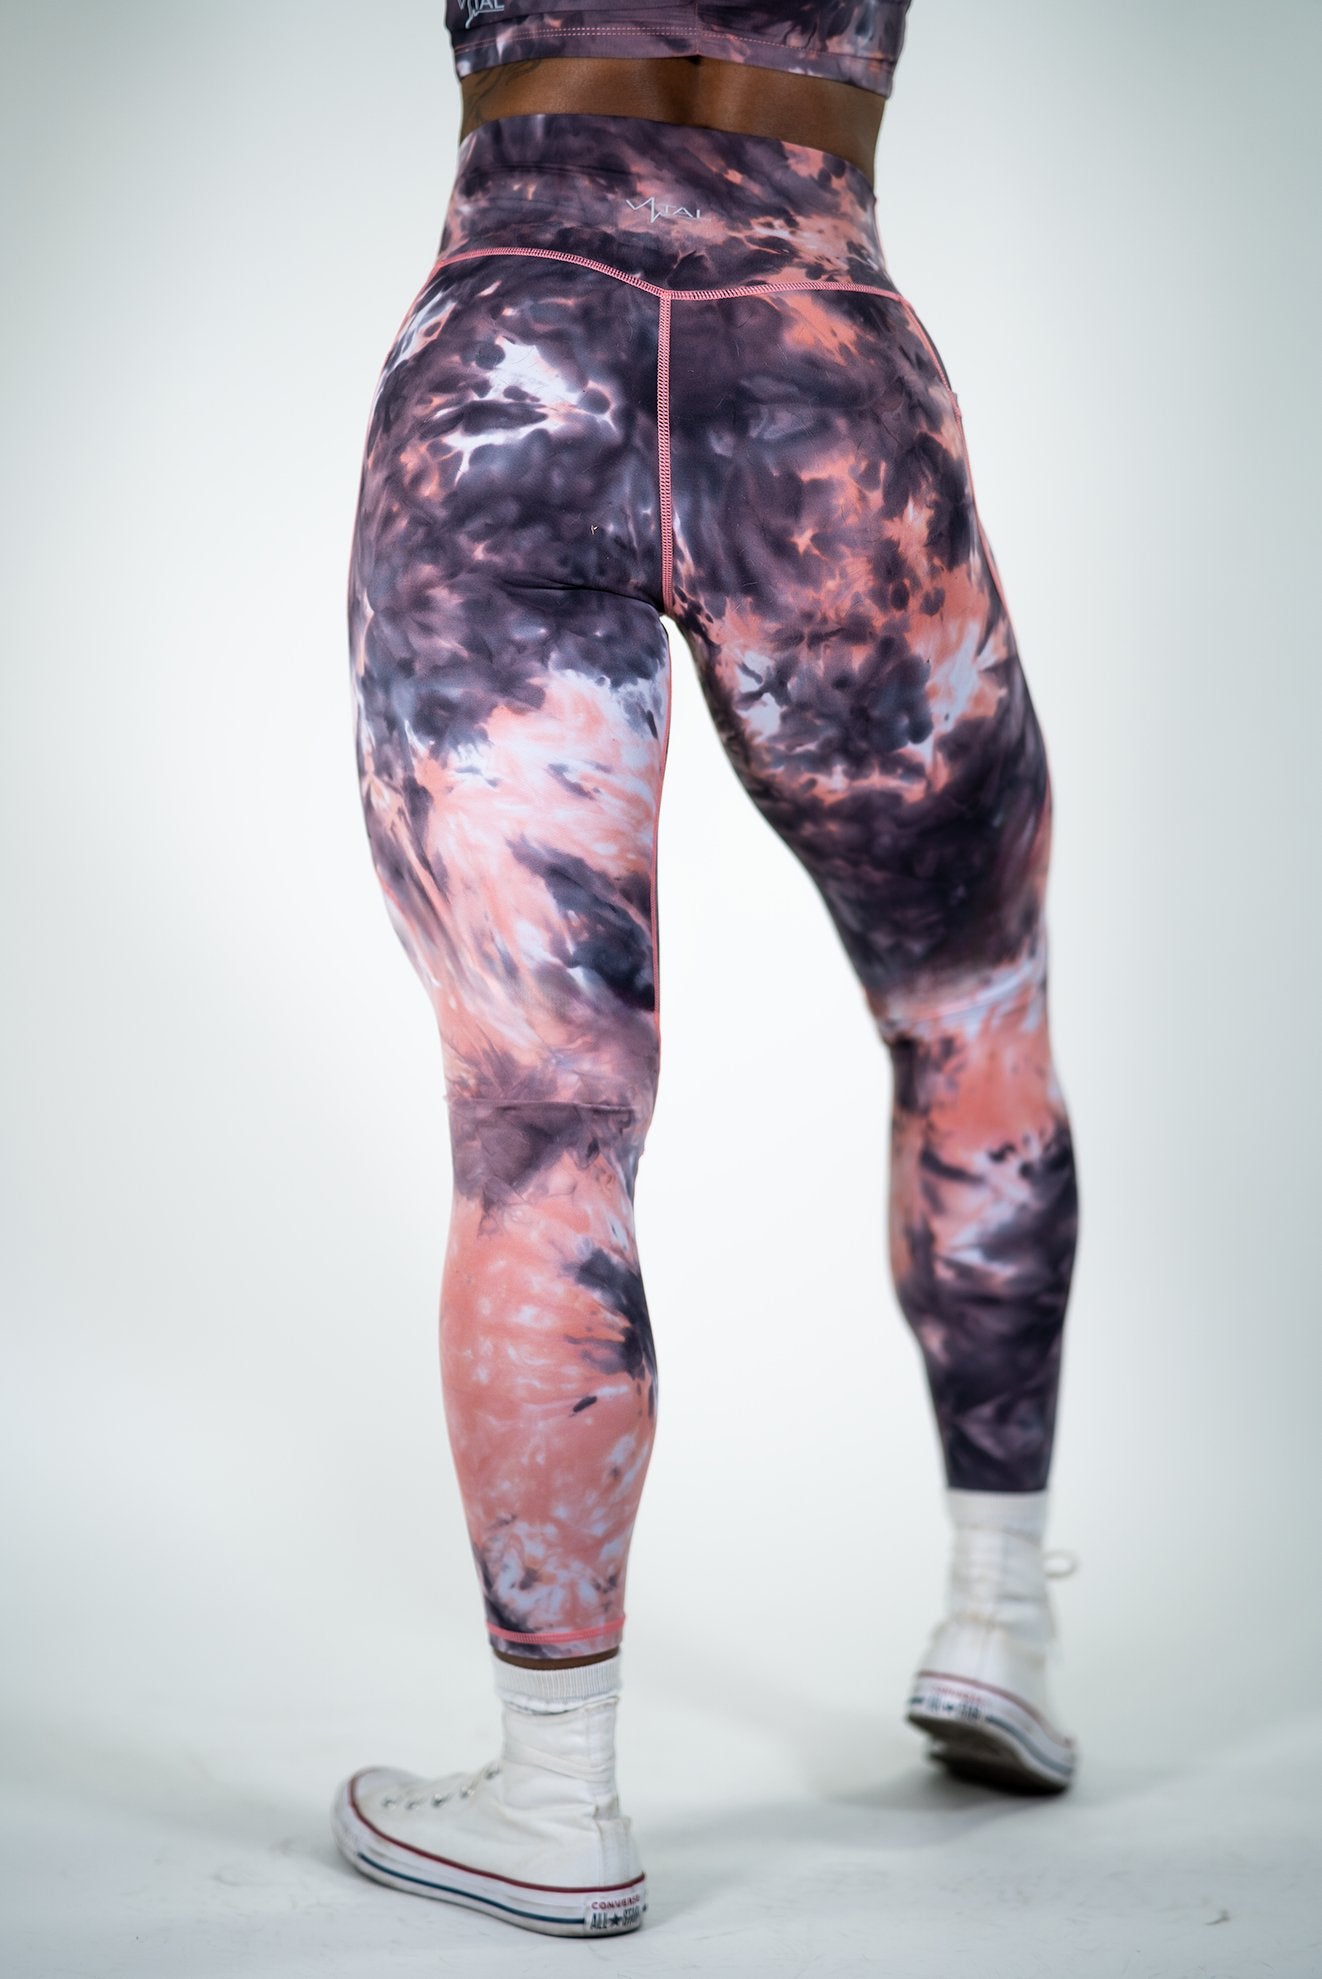 Women's Athletic Leggings Featuring Marble Print Accents. (6 Pack) - High  Waist Design - Spandex Compression Fit - Breathable, Moisture Wicking  Fabric - 7/8 Length - 88% Polyester, 12% Spandex - 6